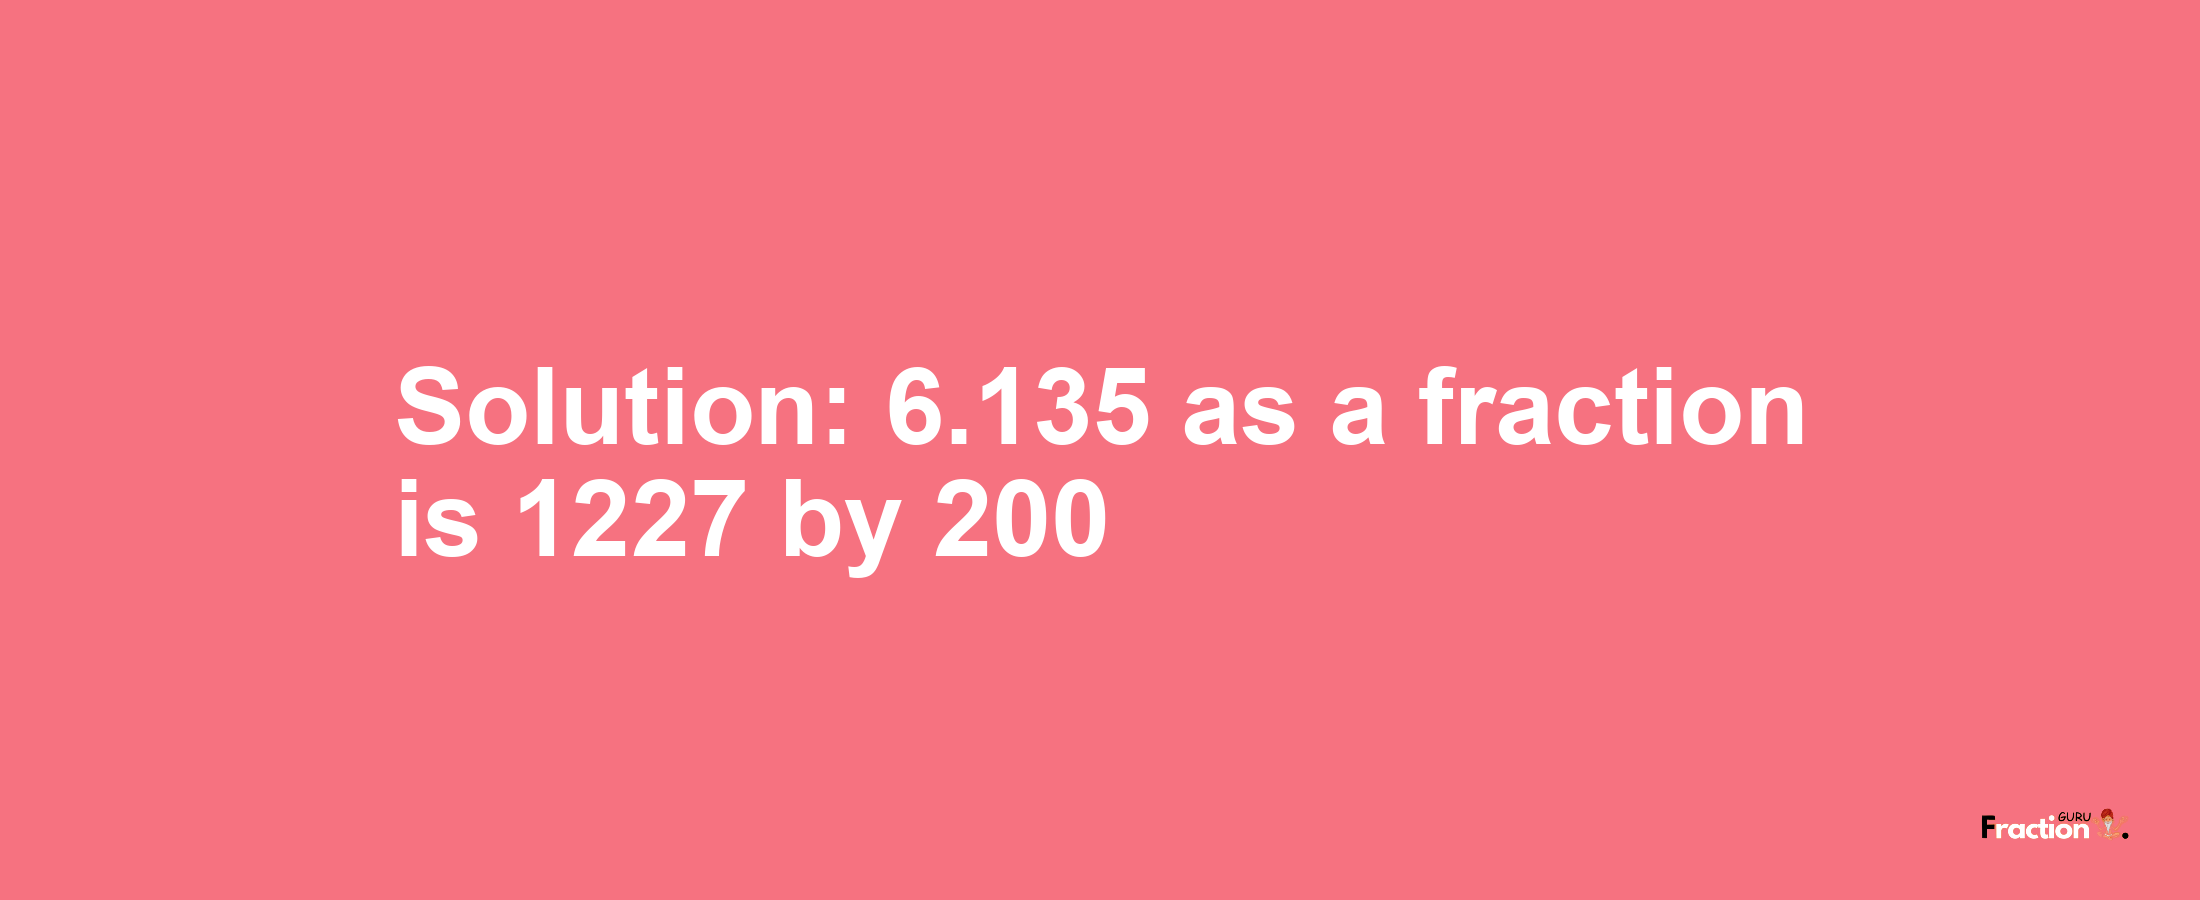 Solution:6.135 as a fraction is 1227/200